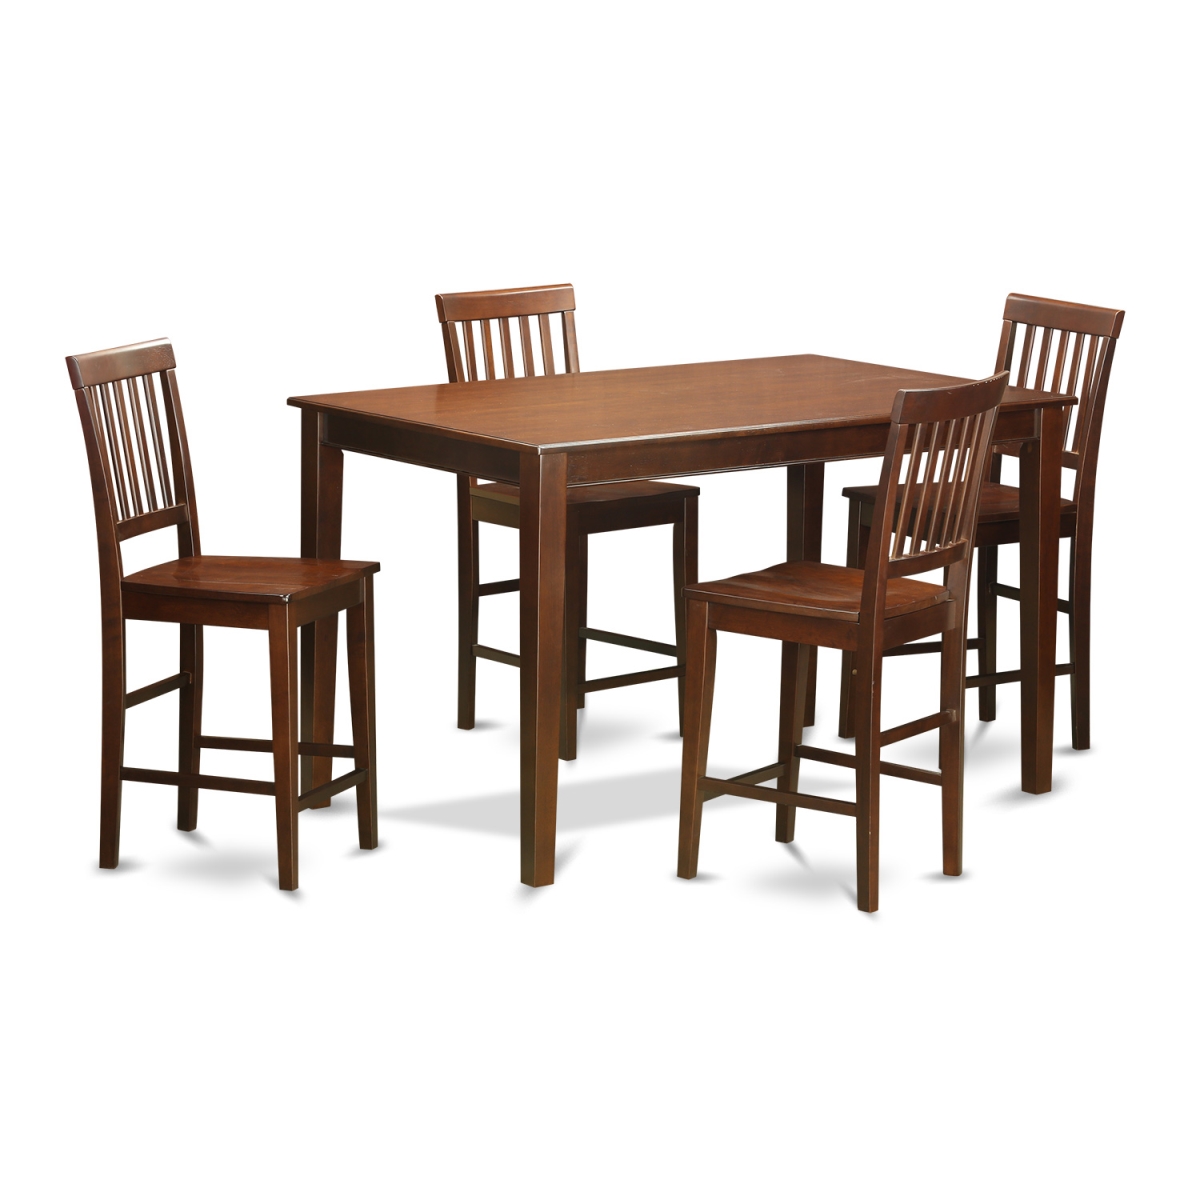 Counter Height Pub Table & 4 Chairs, Mahogany